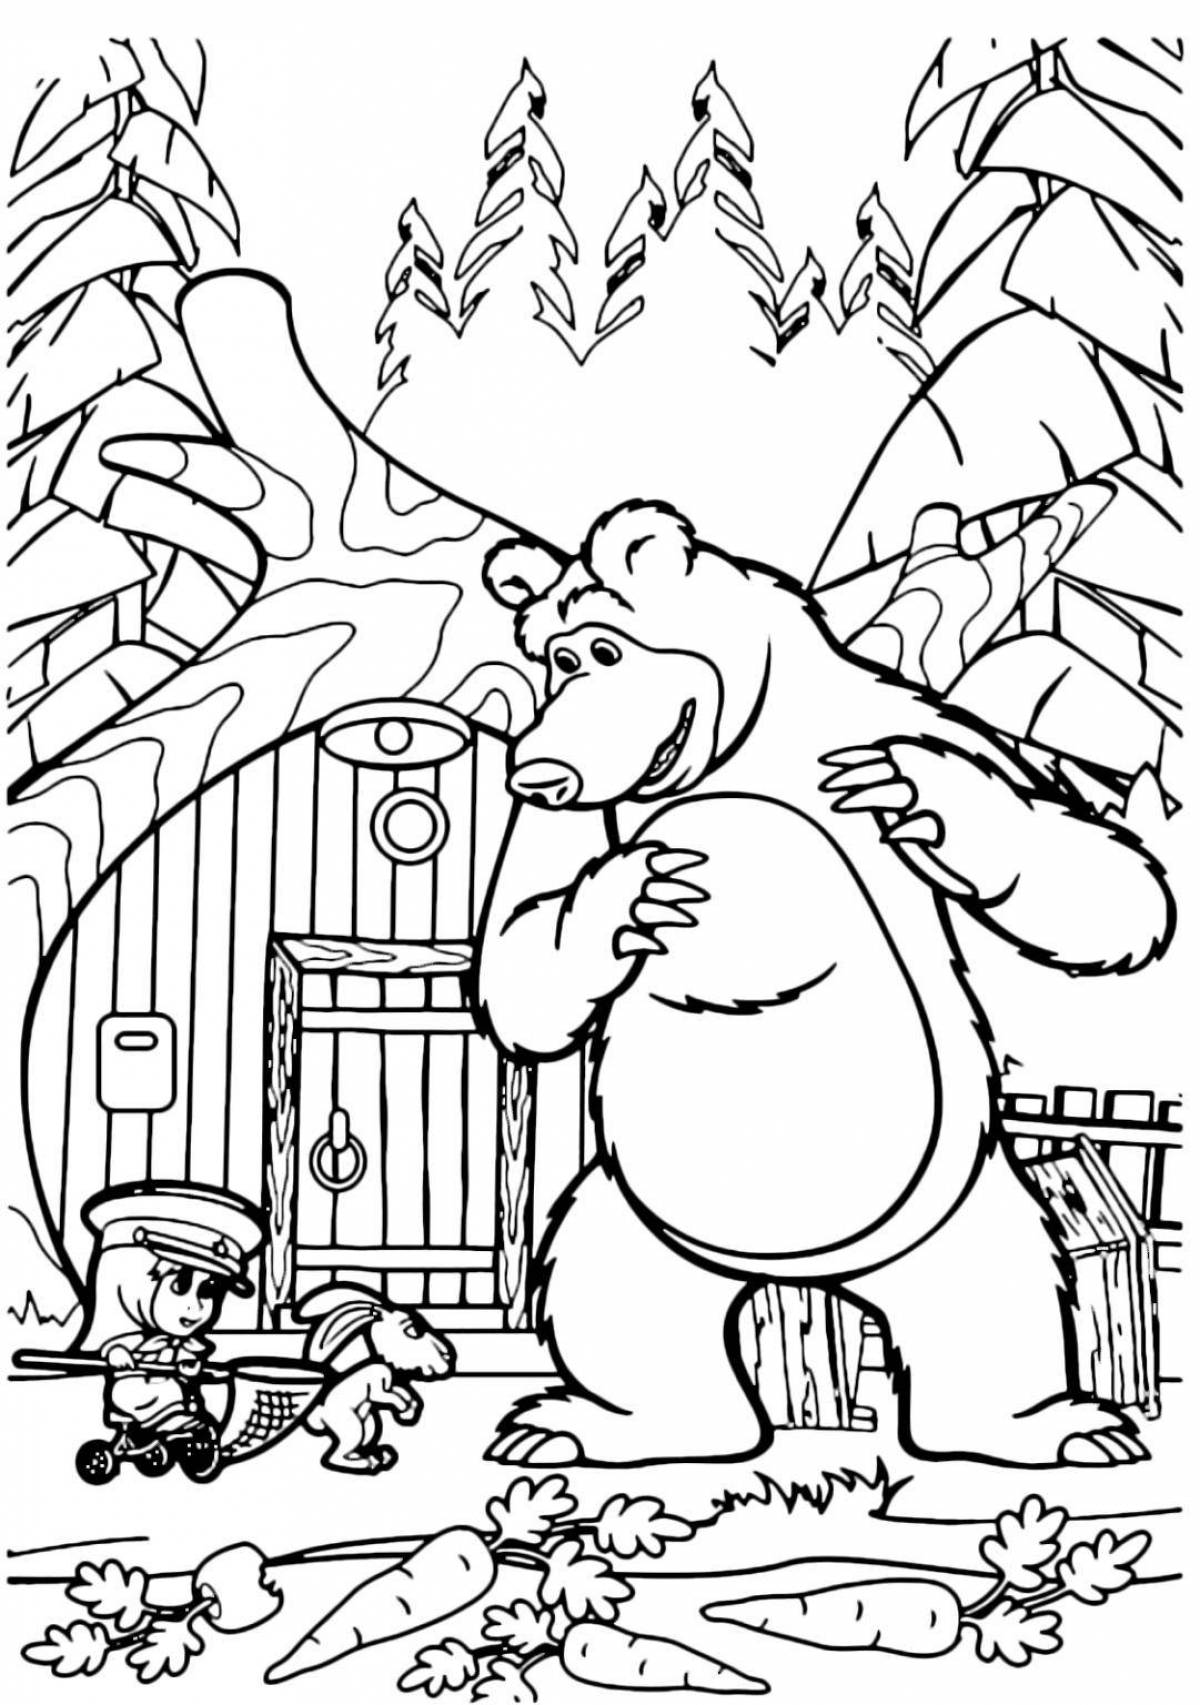 Fabulous bear and hare coloring book